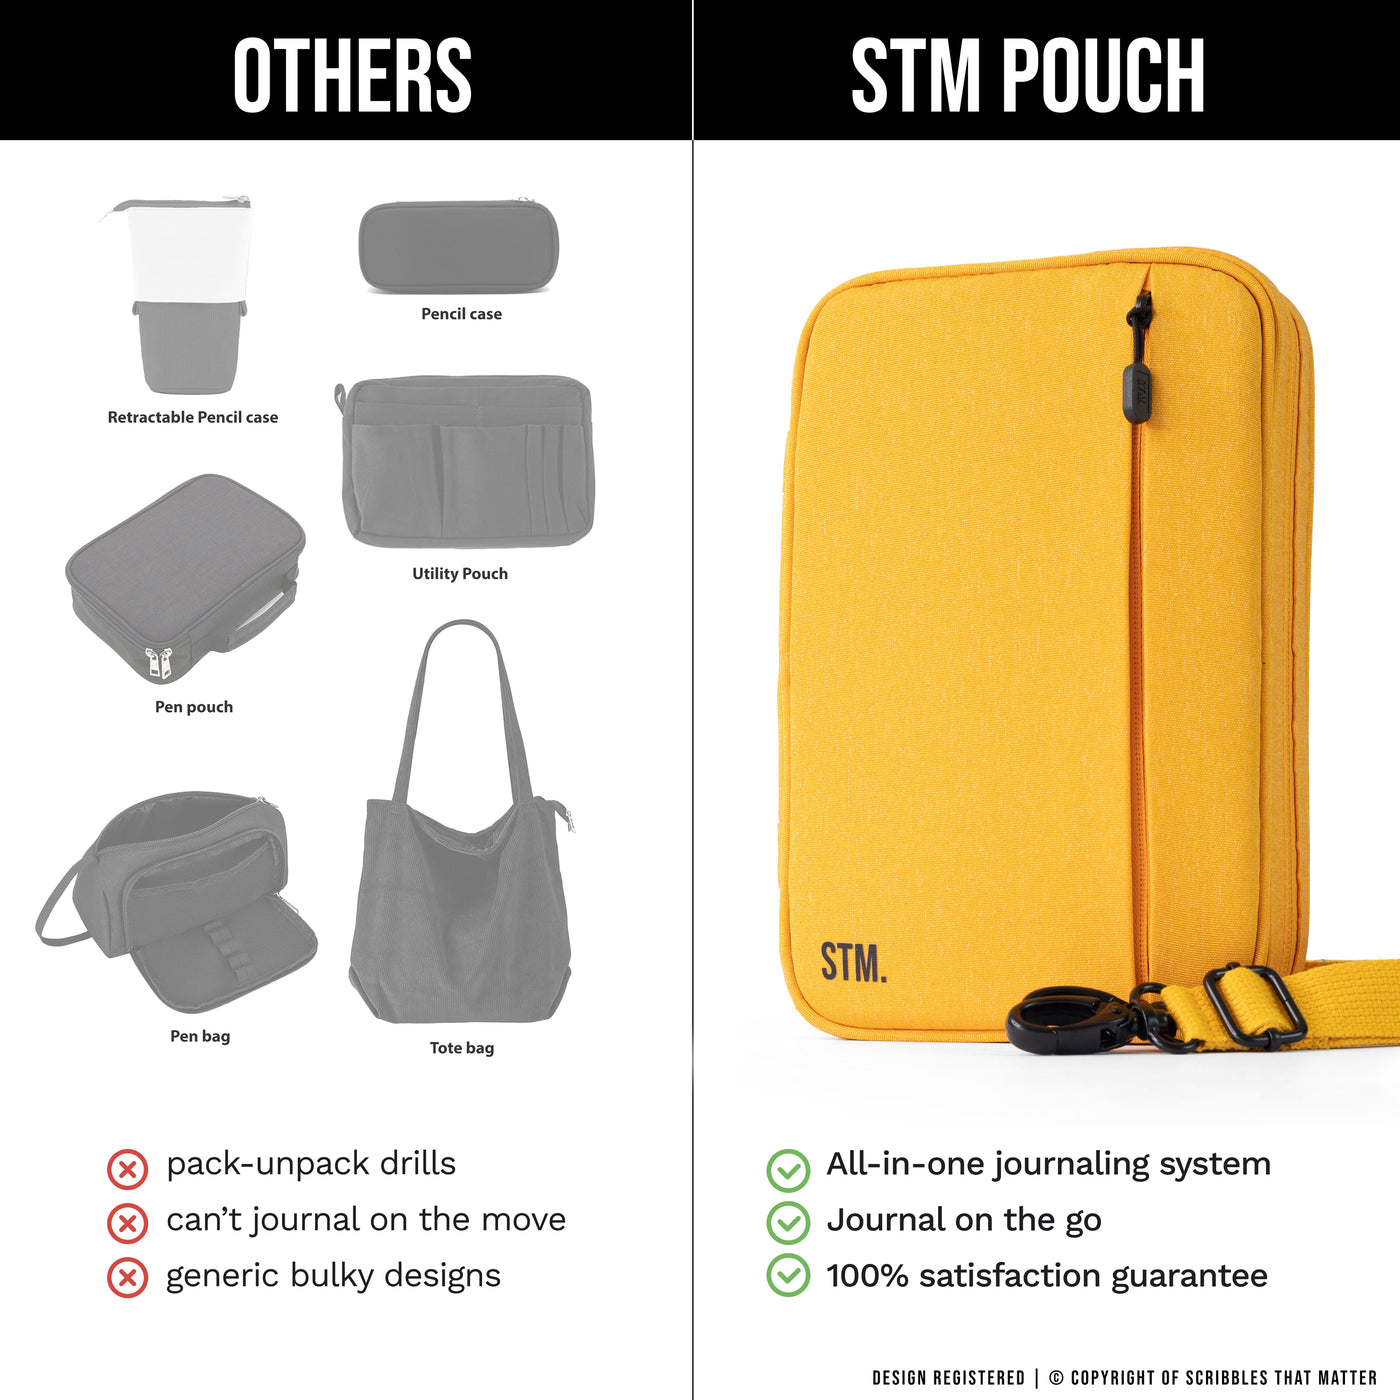 STM Pouch